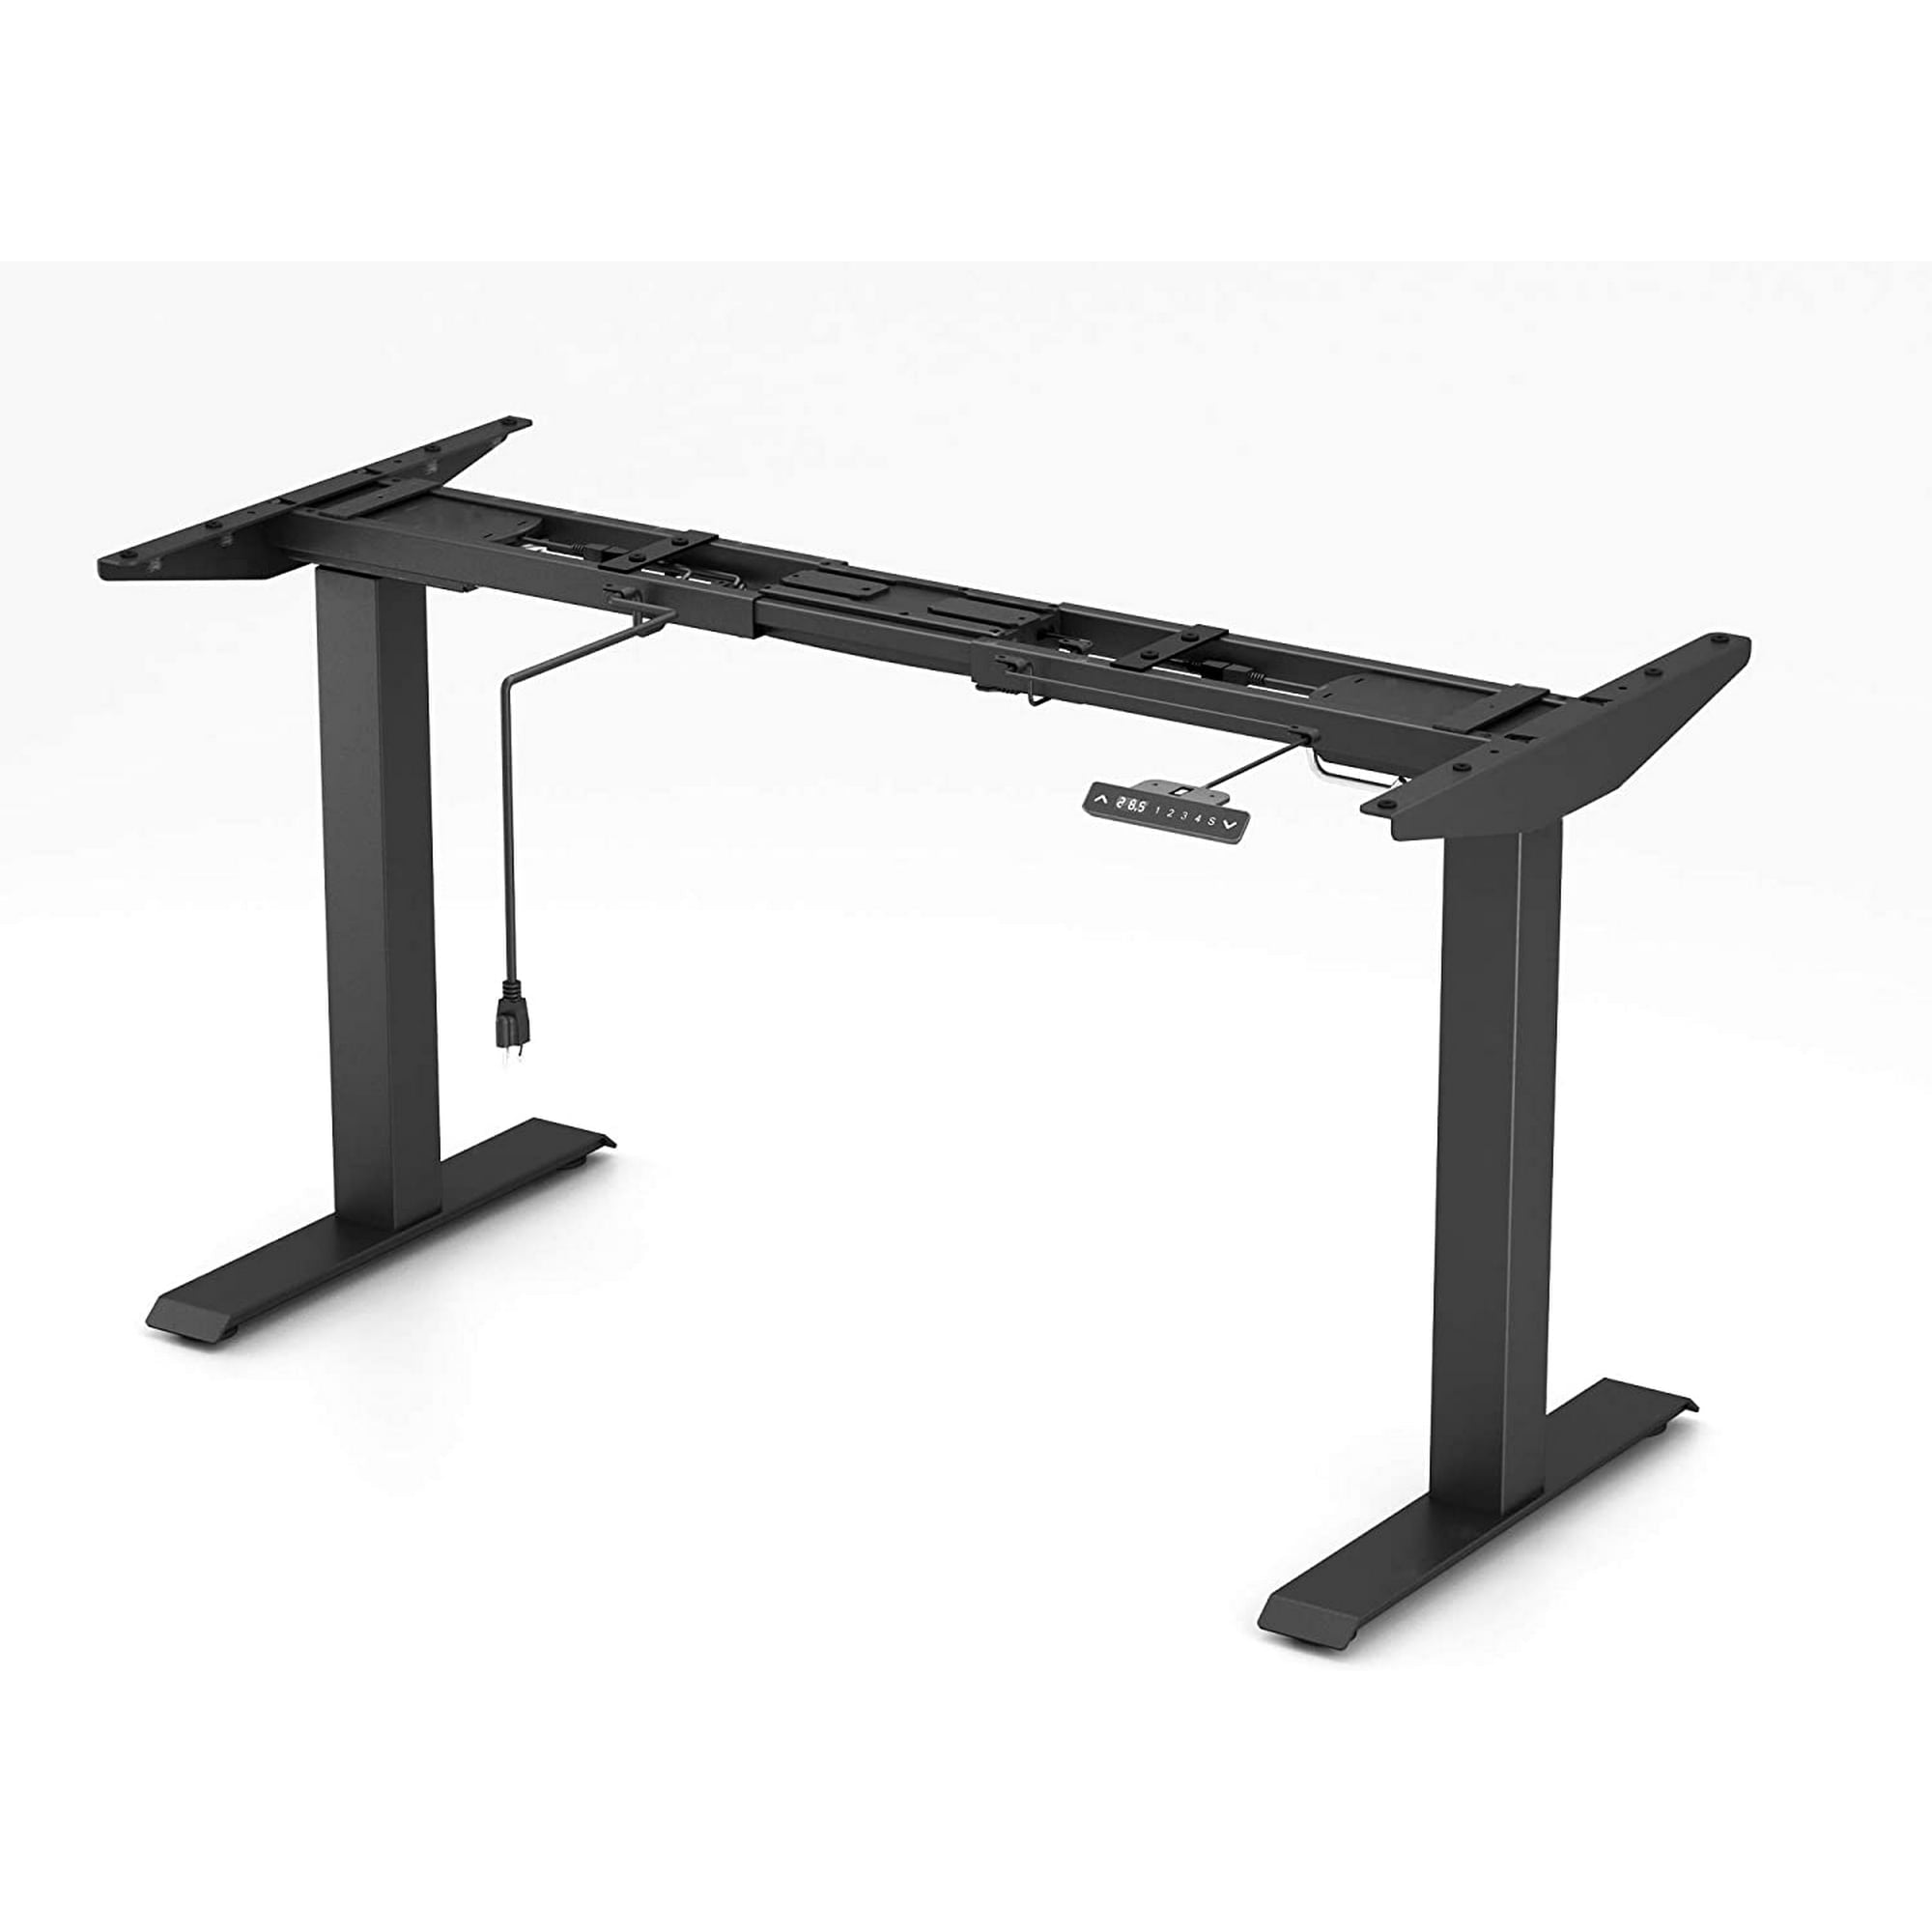 Cubespace Electric Standing Desk Frame Dual Motor Height Adjustable Sit Stand Desk Base Motorized Stand Up Desk Leg with 4 Memory Positions & Touch Screen Control Panel, Black Frame Only